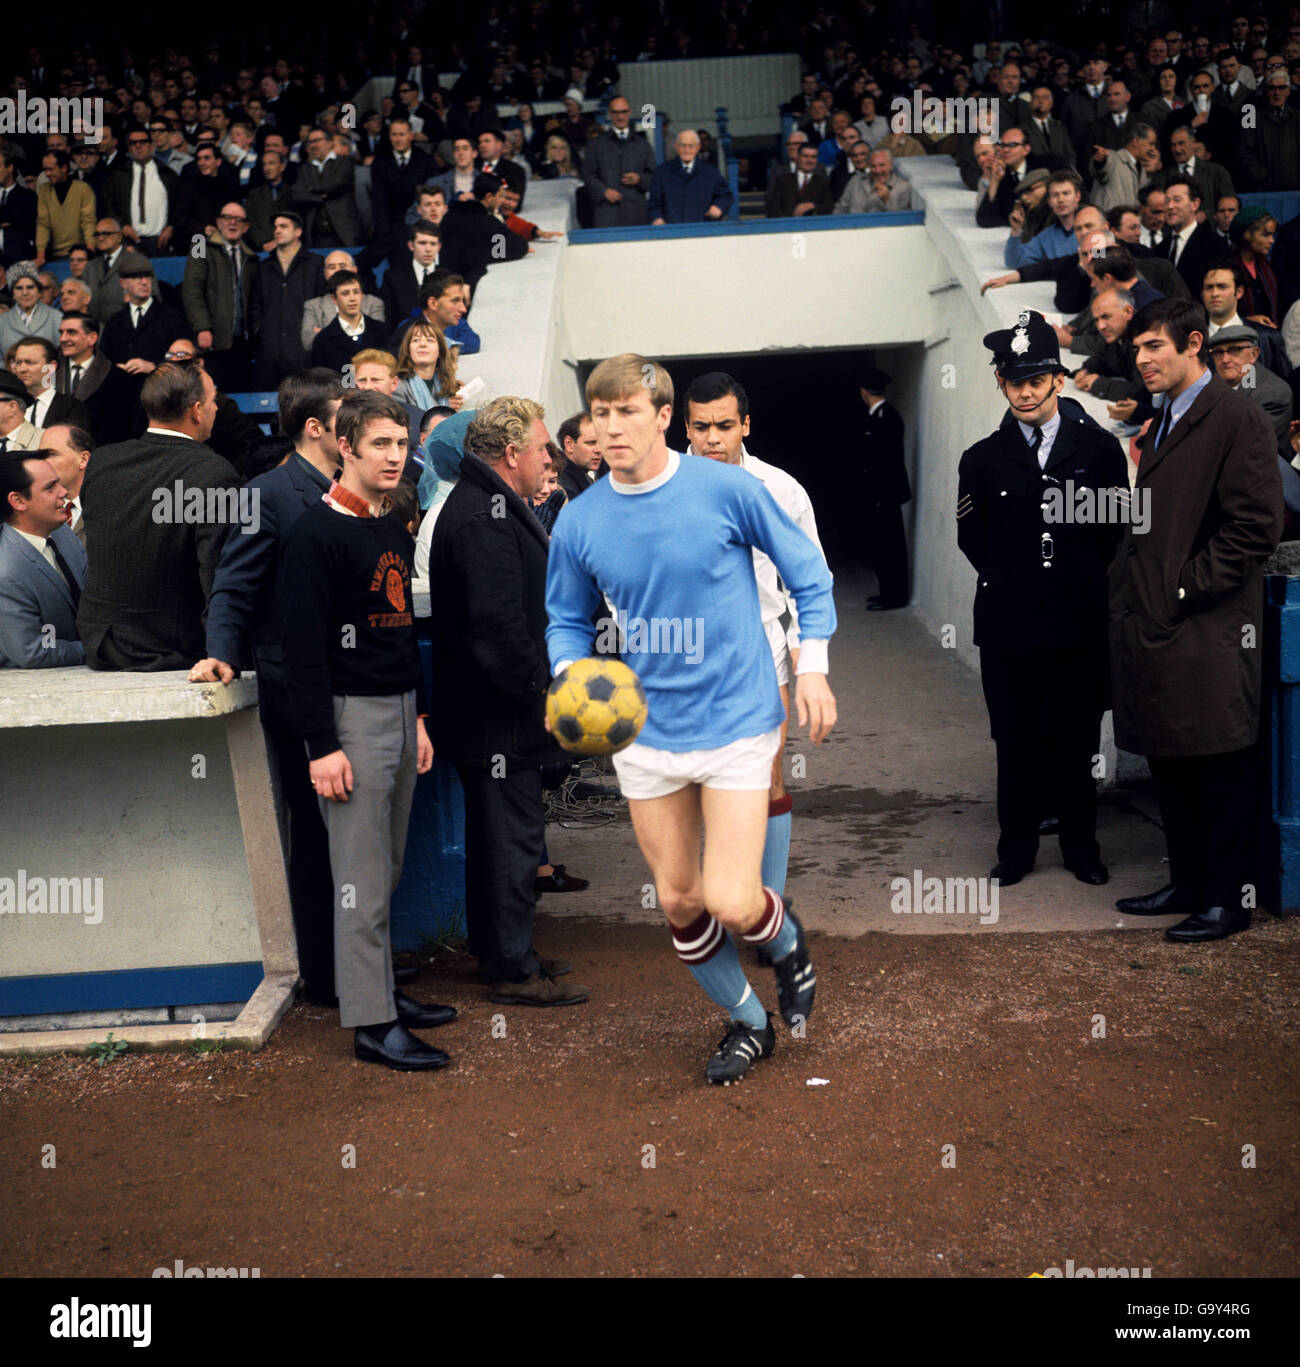 Fußball - Football League Division One - Manchester City / Manchester United - Maine Road. Colin Bell, Manchester City Stockfoto